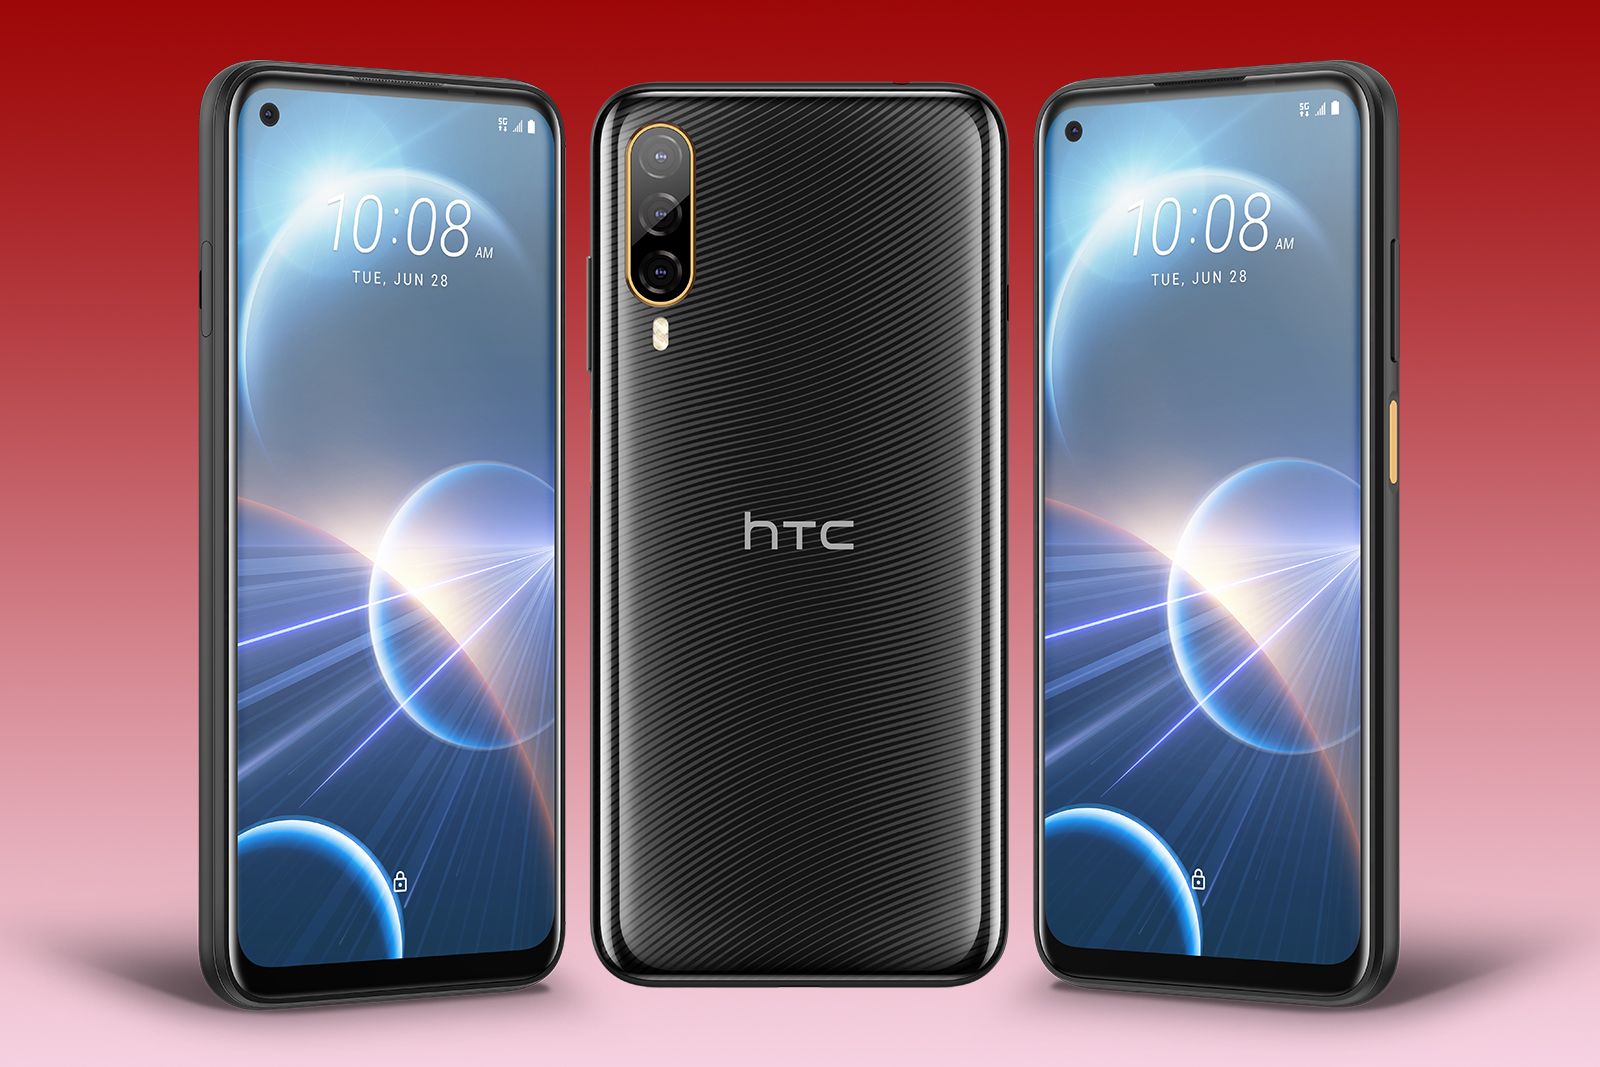 HTC Desire 22 Pro is the Viverse phone we were expecting